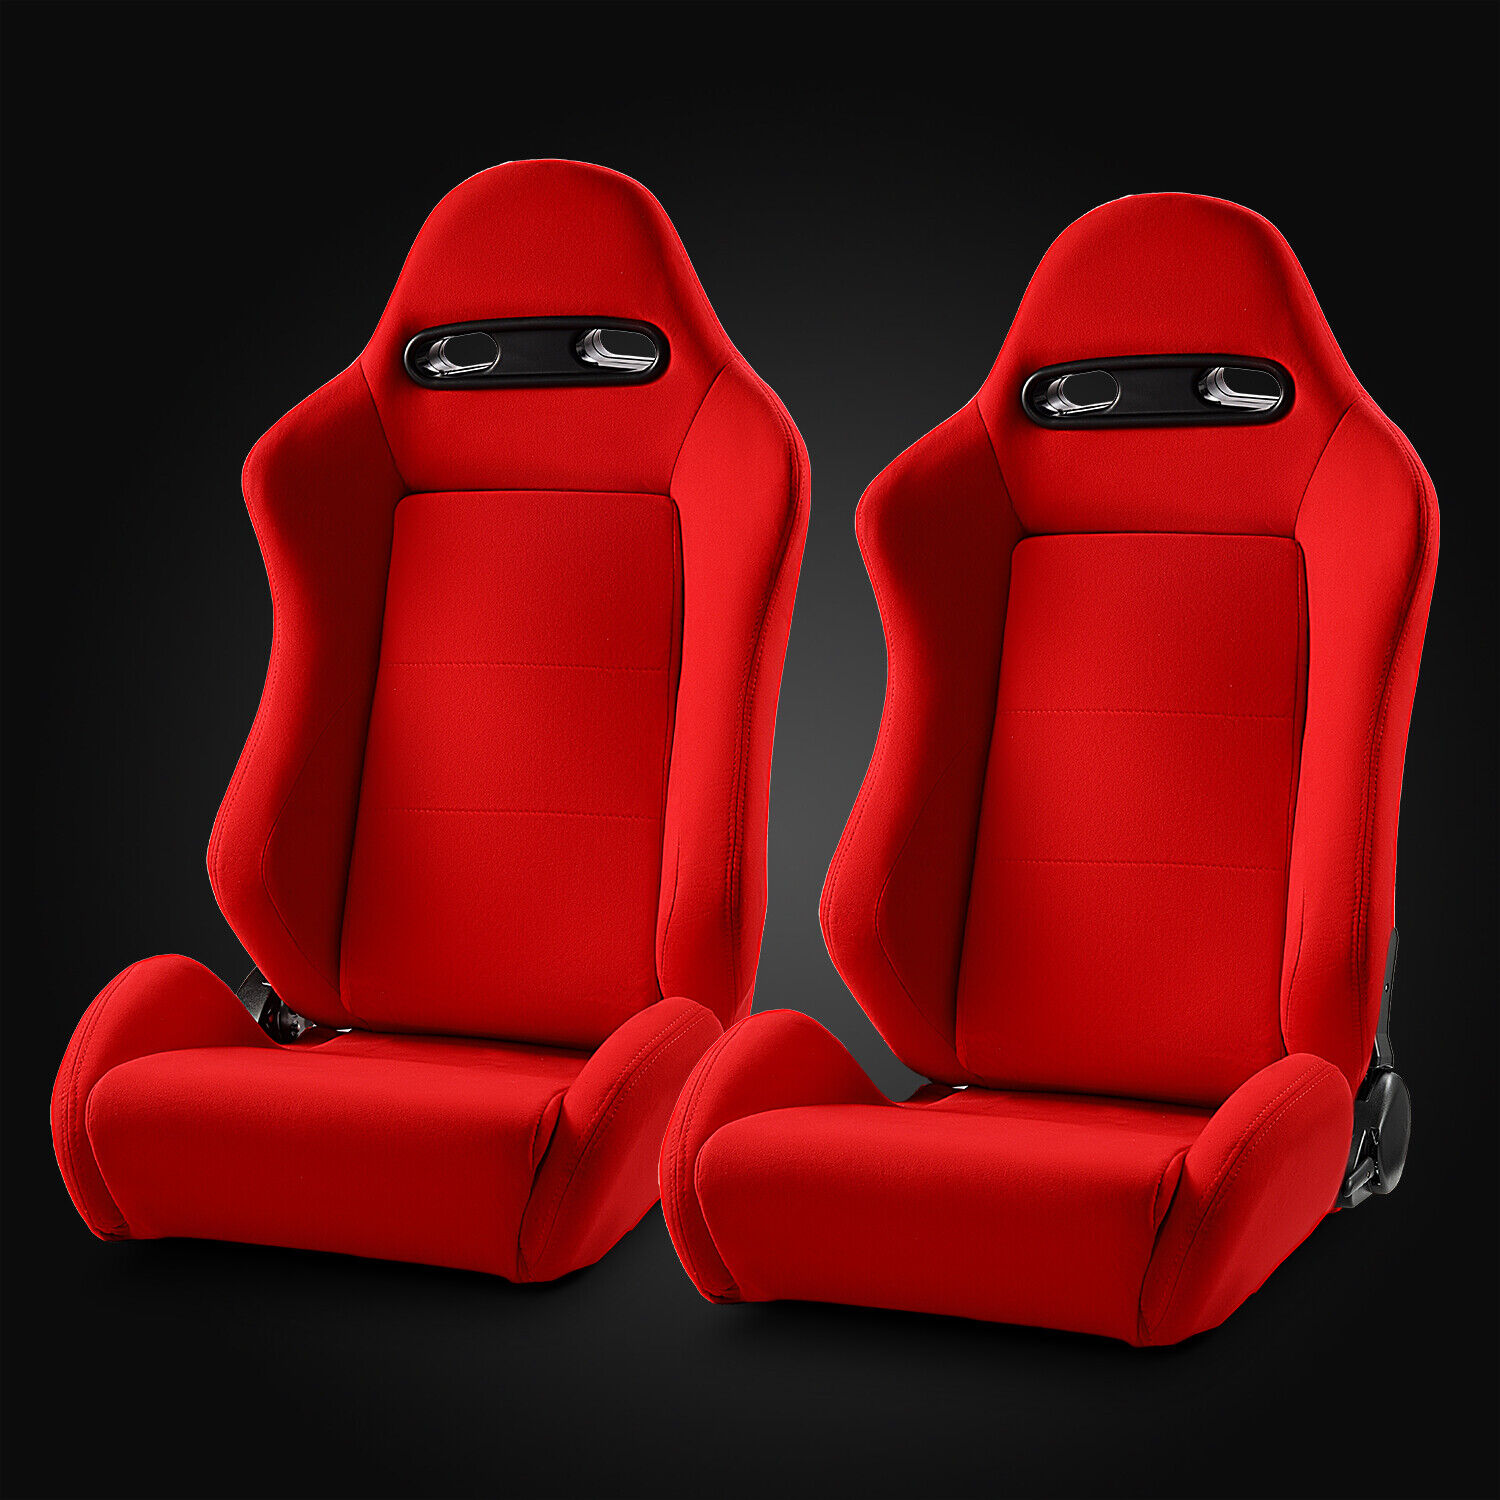 Reclinable RED Fabric Classic Style Racing Seats Left/Right W/Slider